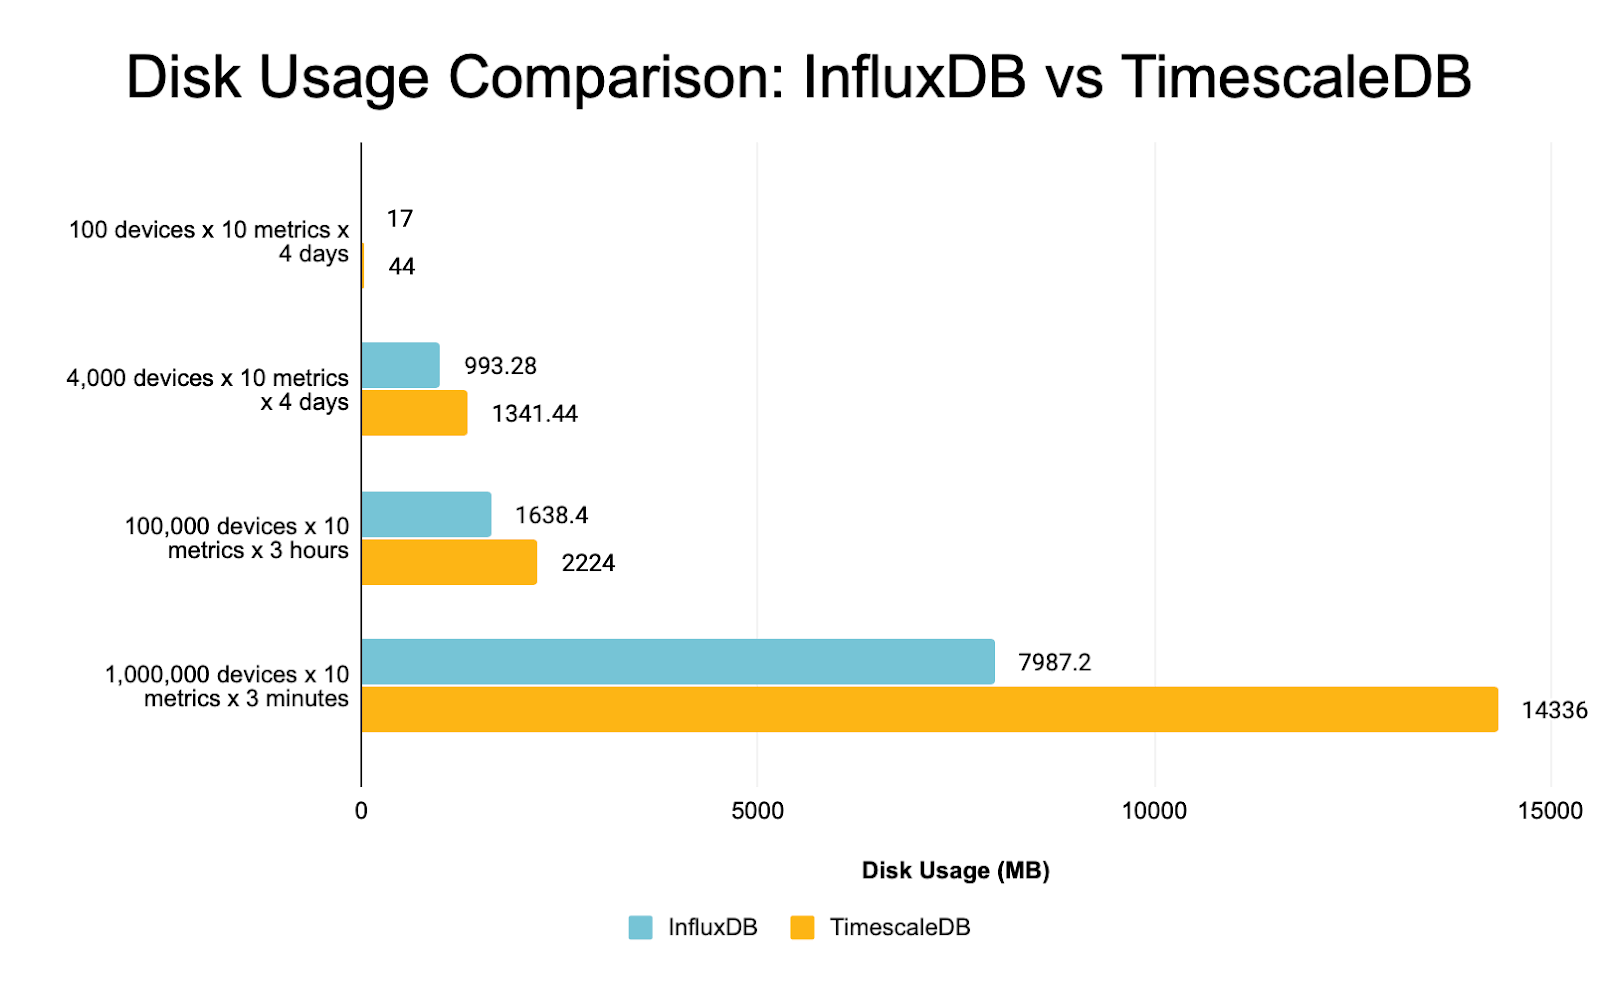 Chart comparing disk usage between InfluxDB and TimescaleDB